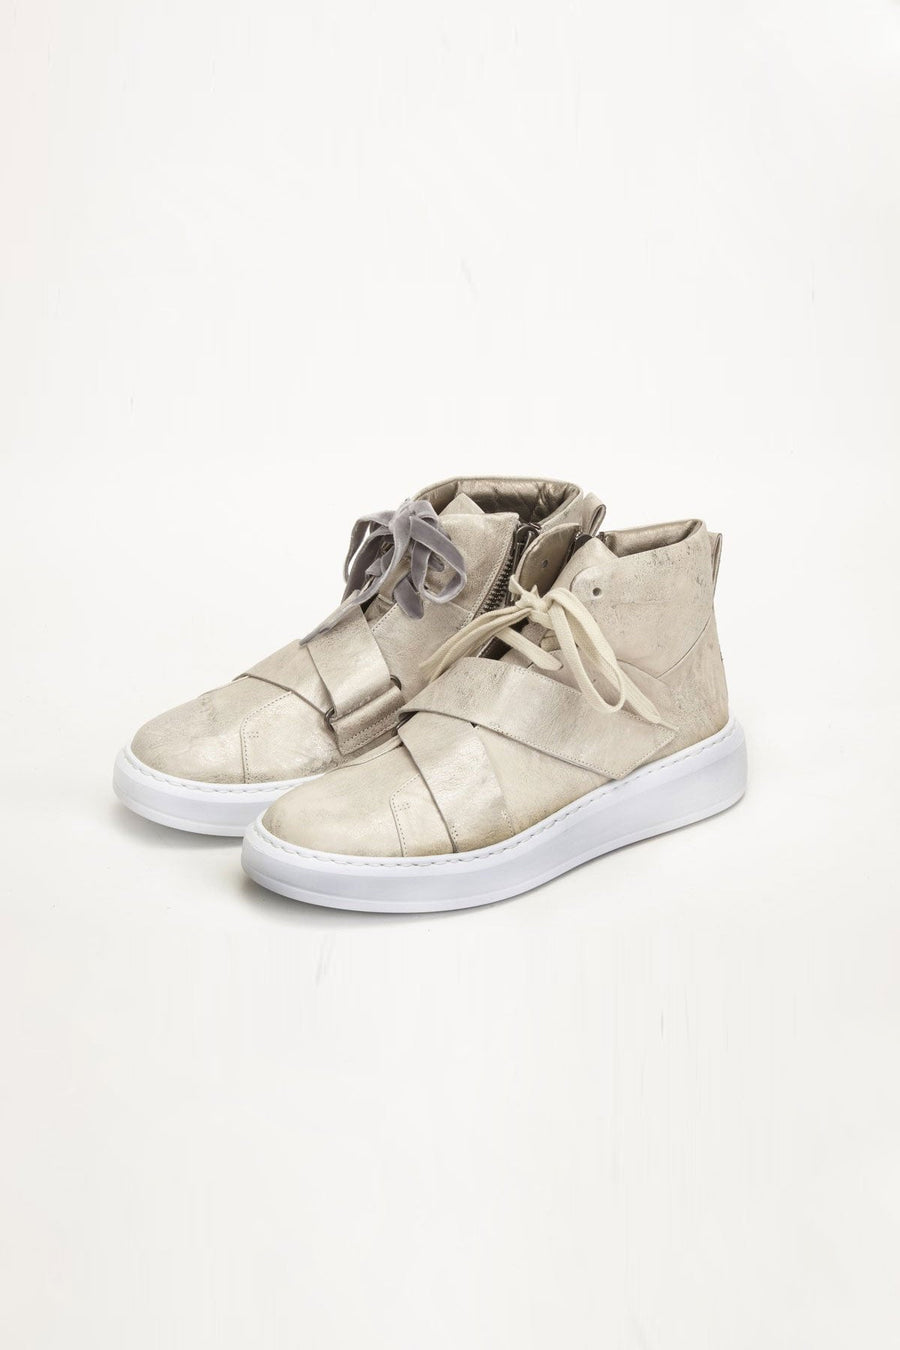 Henry Beguelin High Top Sneaker, Sand - Burning Torch Online Boutique